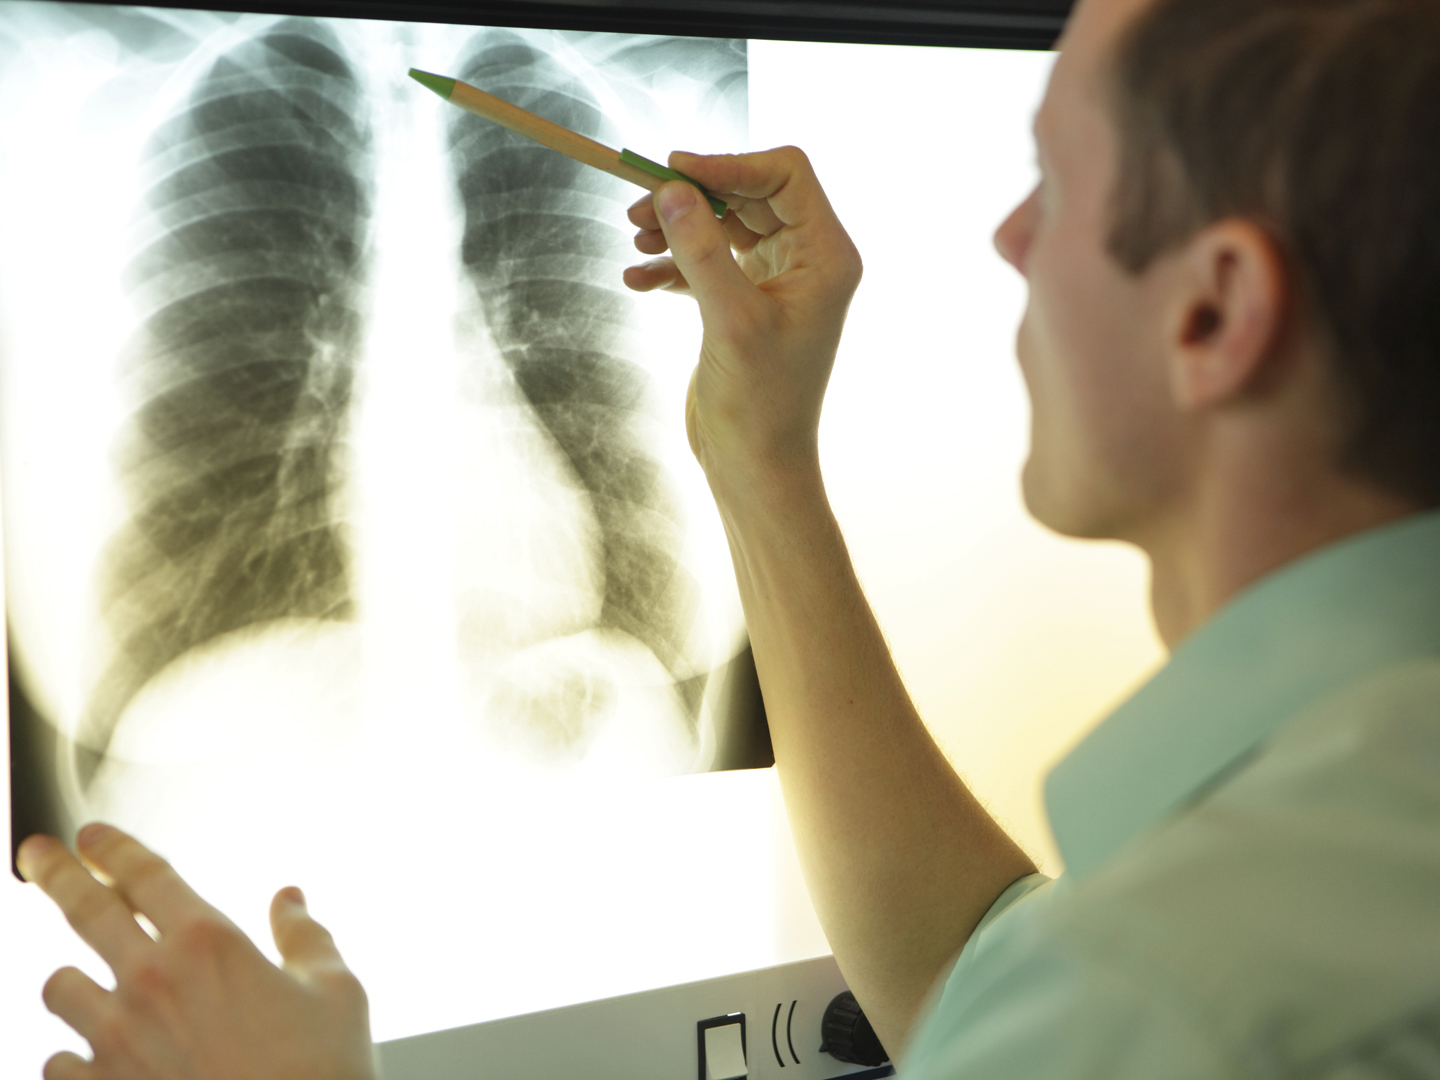 specialist watching image of chest at x-ray film viewer